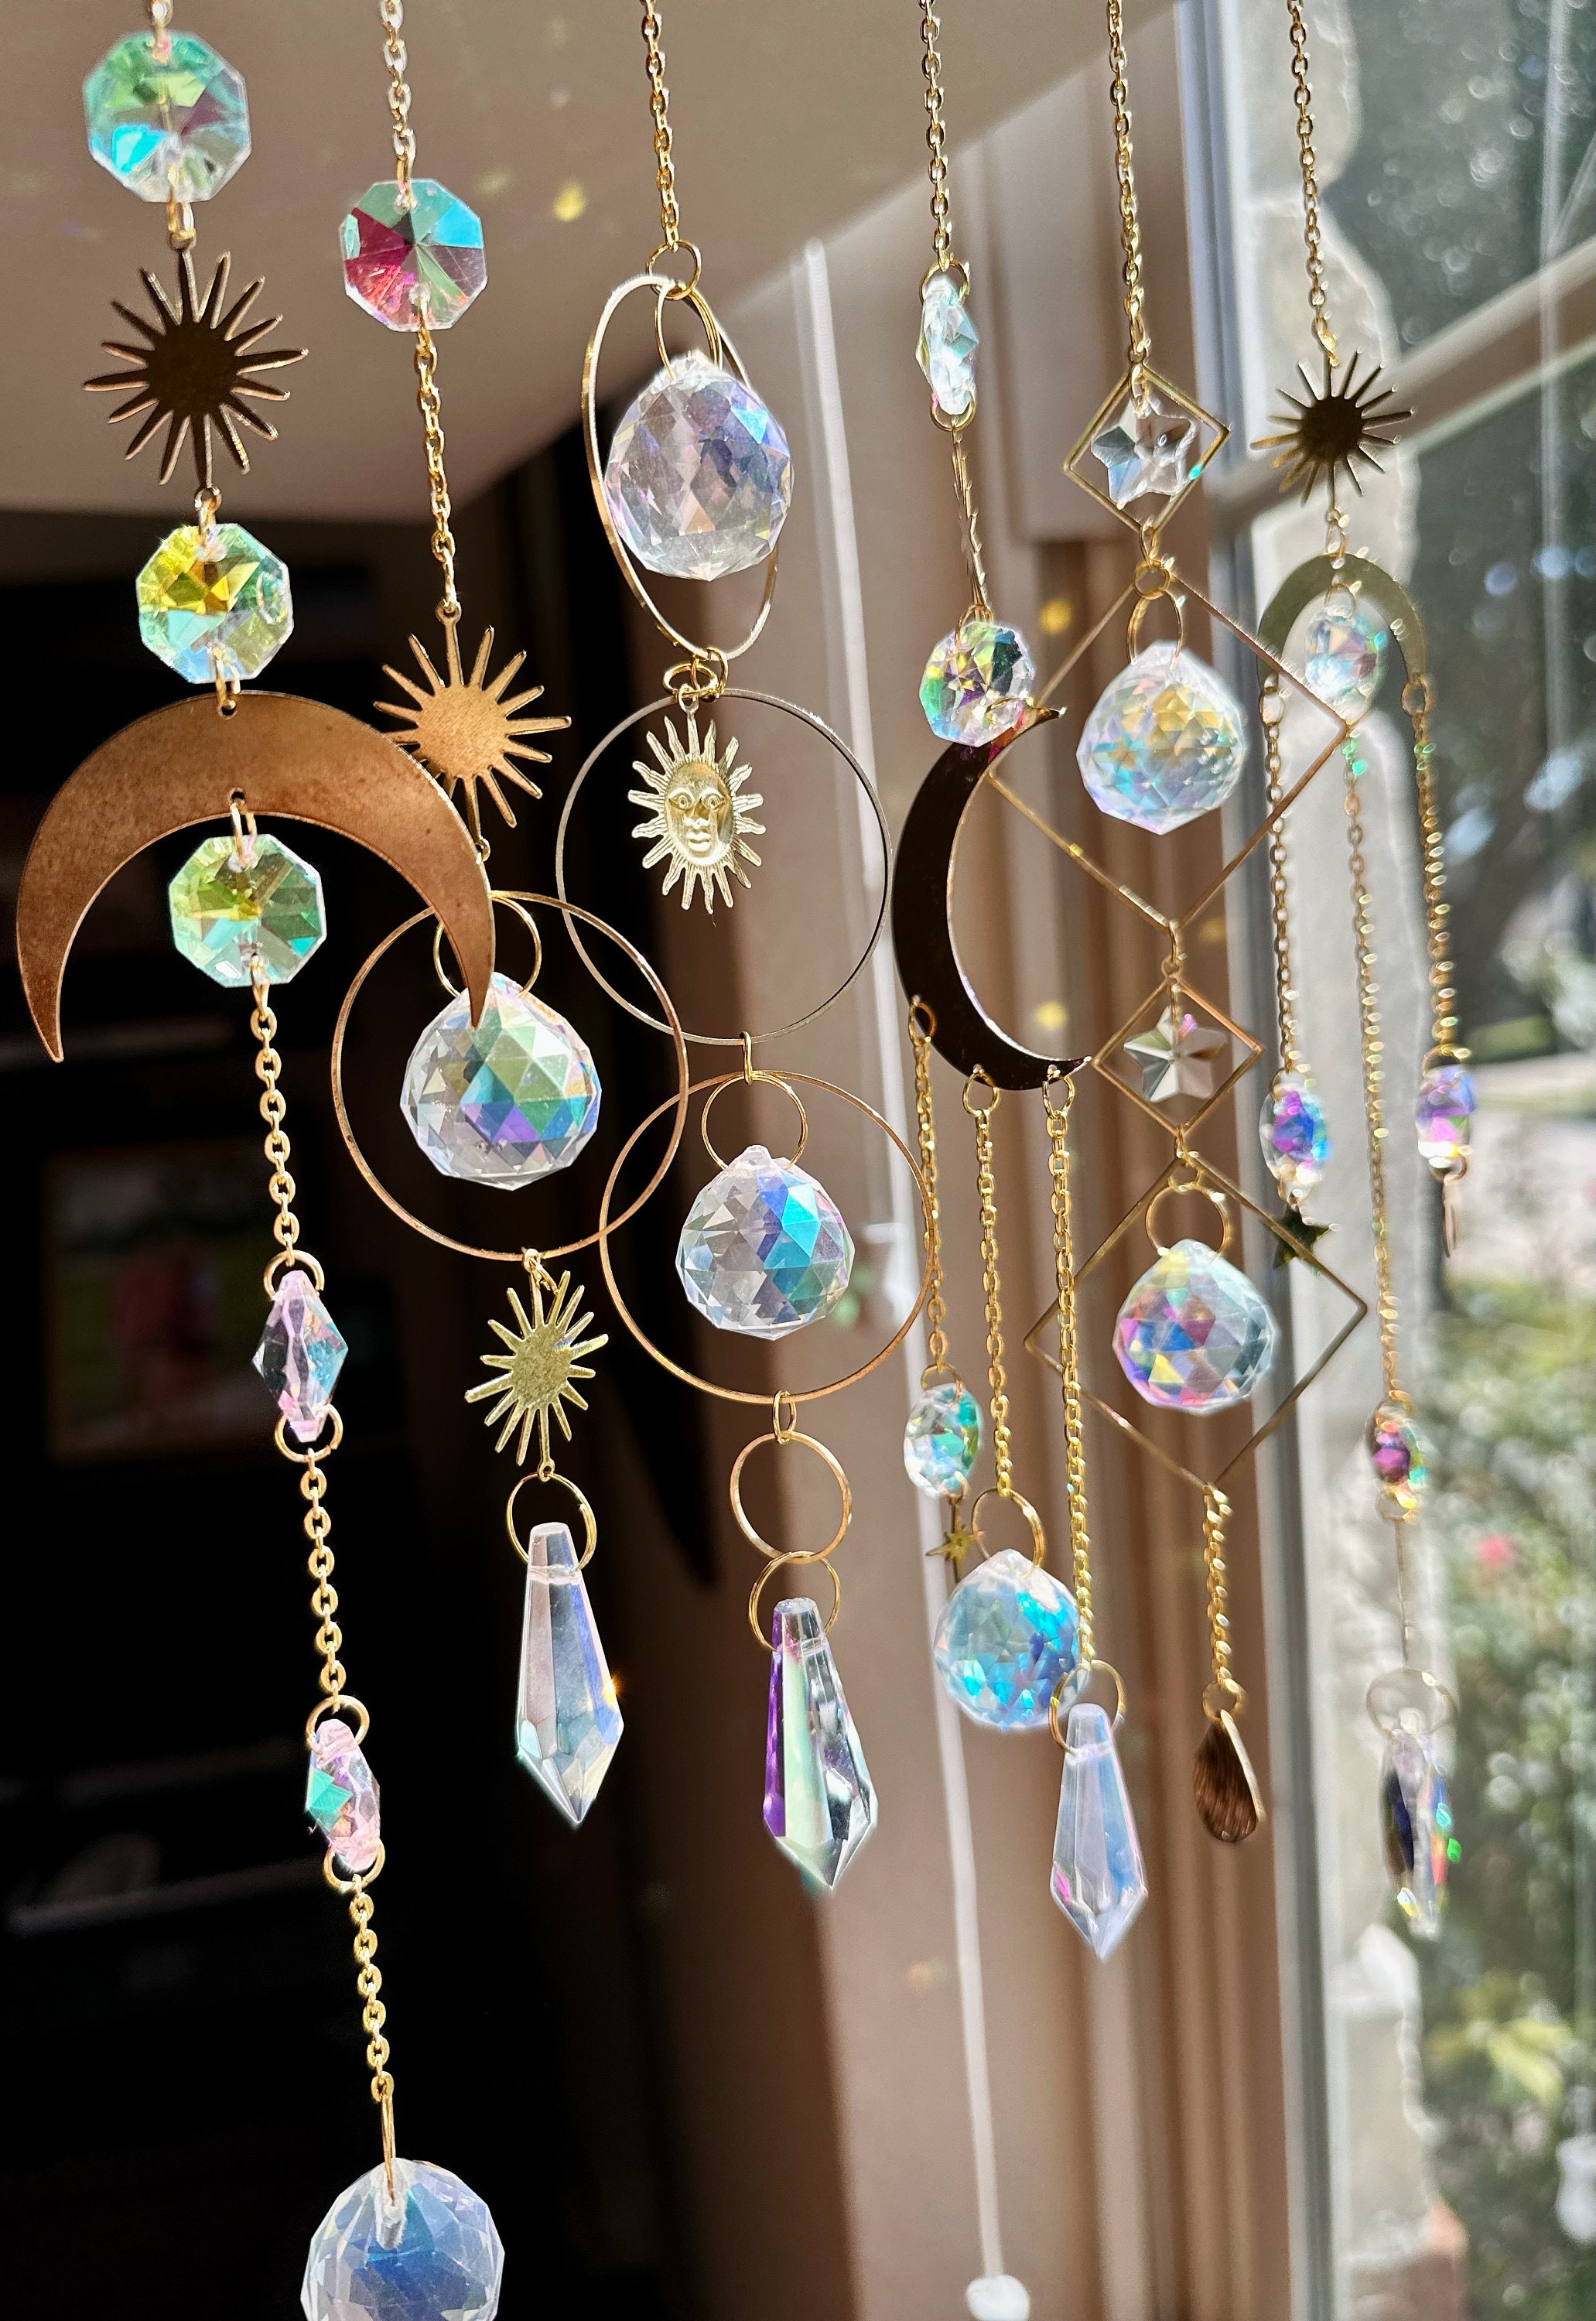 Hanging Crystals Suncatcher Sun Catcher with Chain Pendant Moon Ornament  Crystal Balls for Window Home Garden Christmas Day Party Wedding  Decoration, Silver 